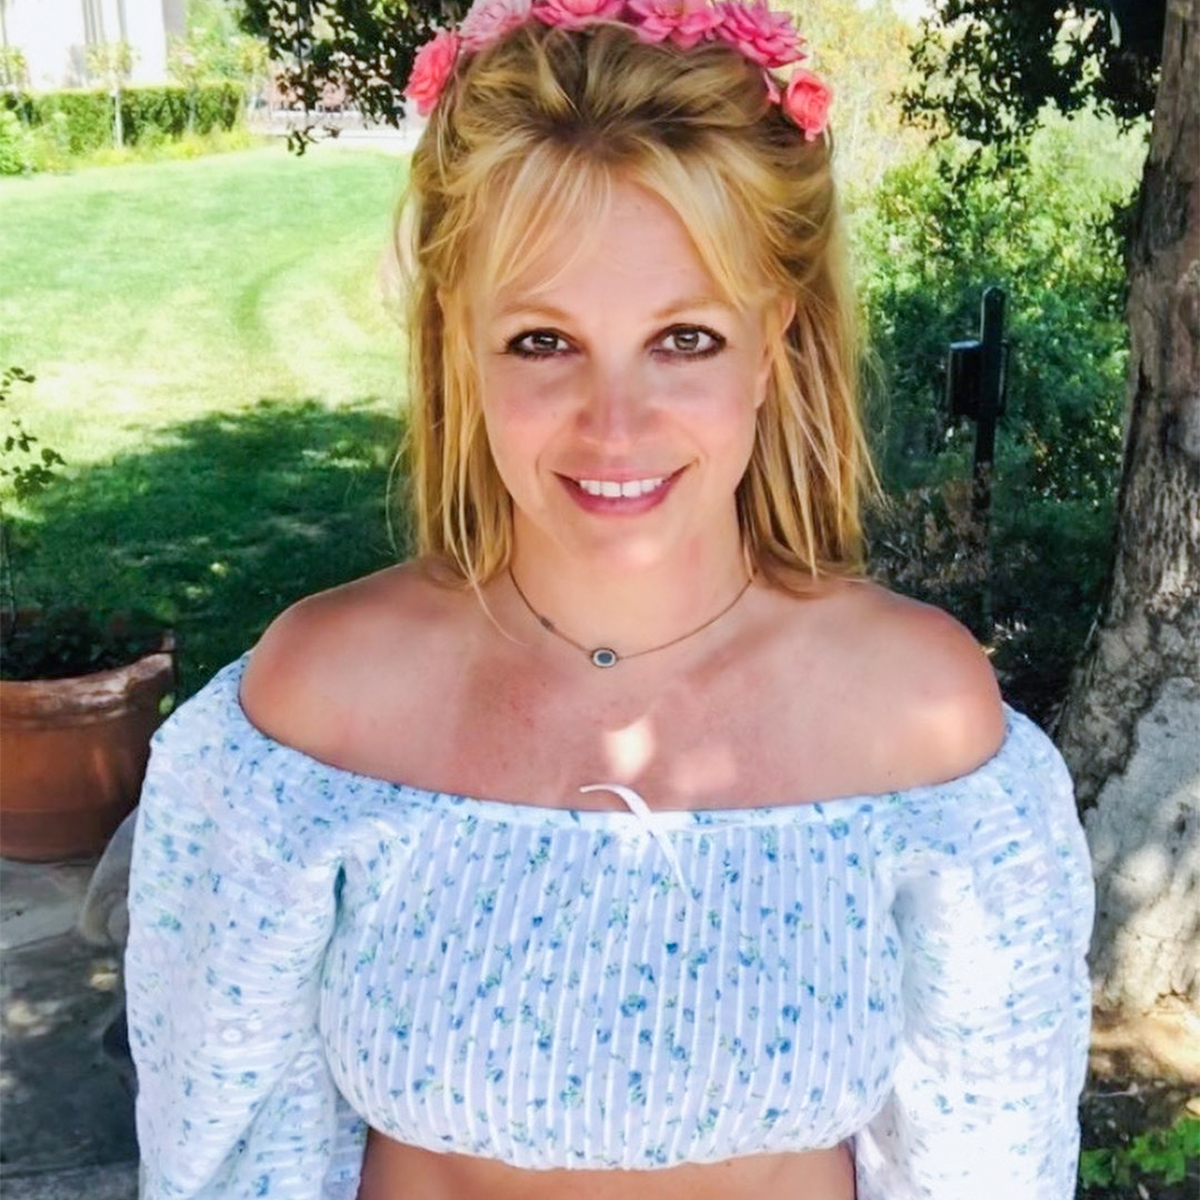 Britney Spears shares a rare photo with Sons Sean and Jayden